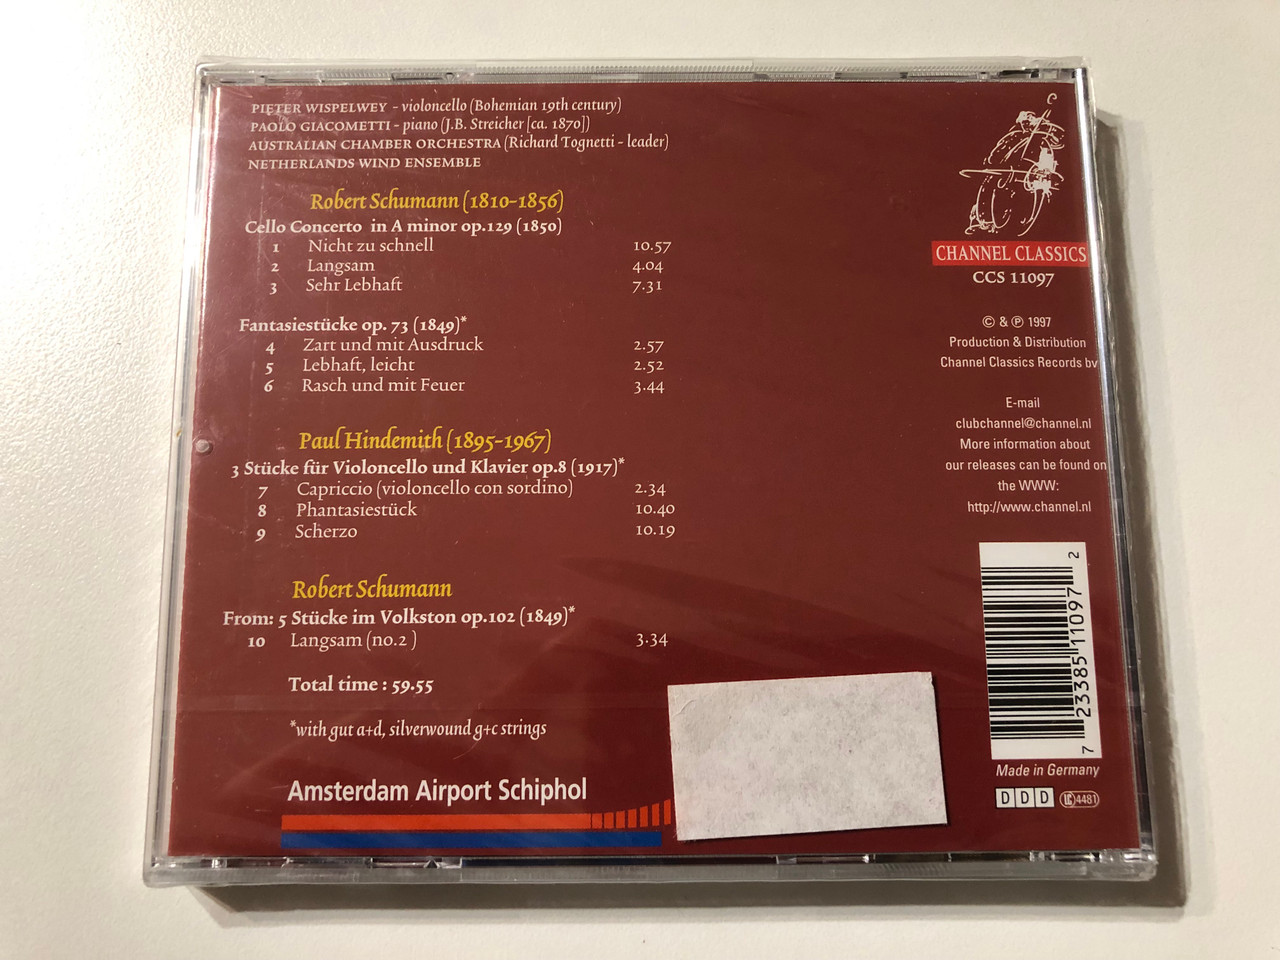 https://cdn11.bigcommerce.com/s-62bdpkt7pb/products/0/images/324091/Pieter_Wispelwey_violoncello_-_Schumann_Cello_Concerto_In_A_Minor_Op.129_Fantasiestcke_op._73_Hindemith_3_Stcke_Fr_Violoncello_Und_Klaviere_Op.8_-_Paolo_Giacometti_piano_Australian__76105.1707634870.1280.1280.JPG?c=2